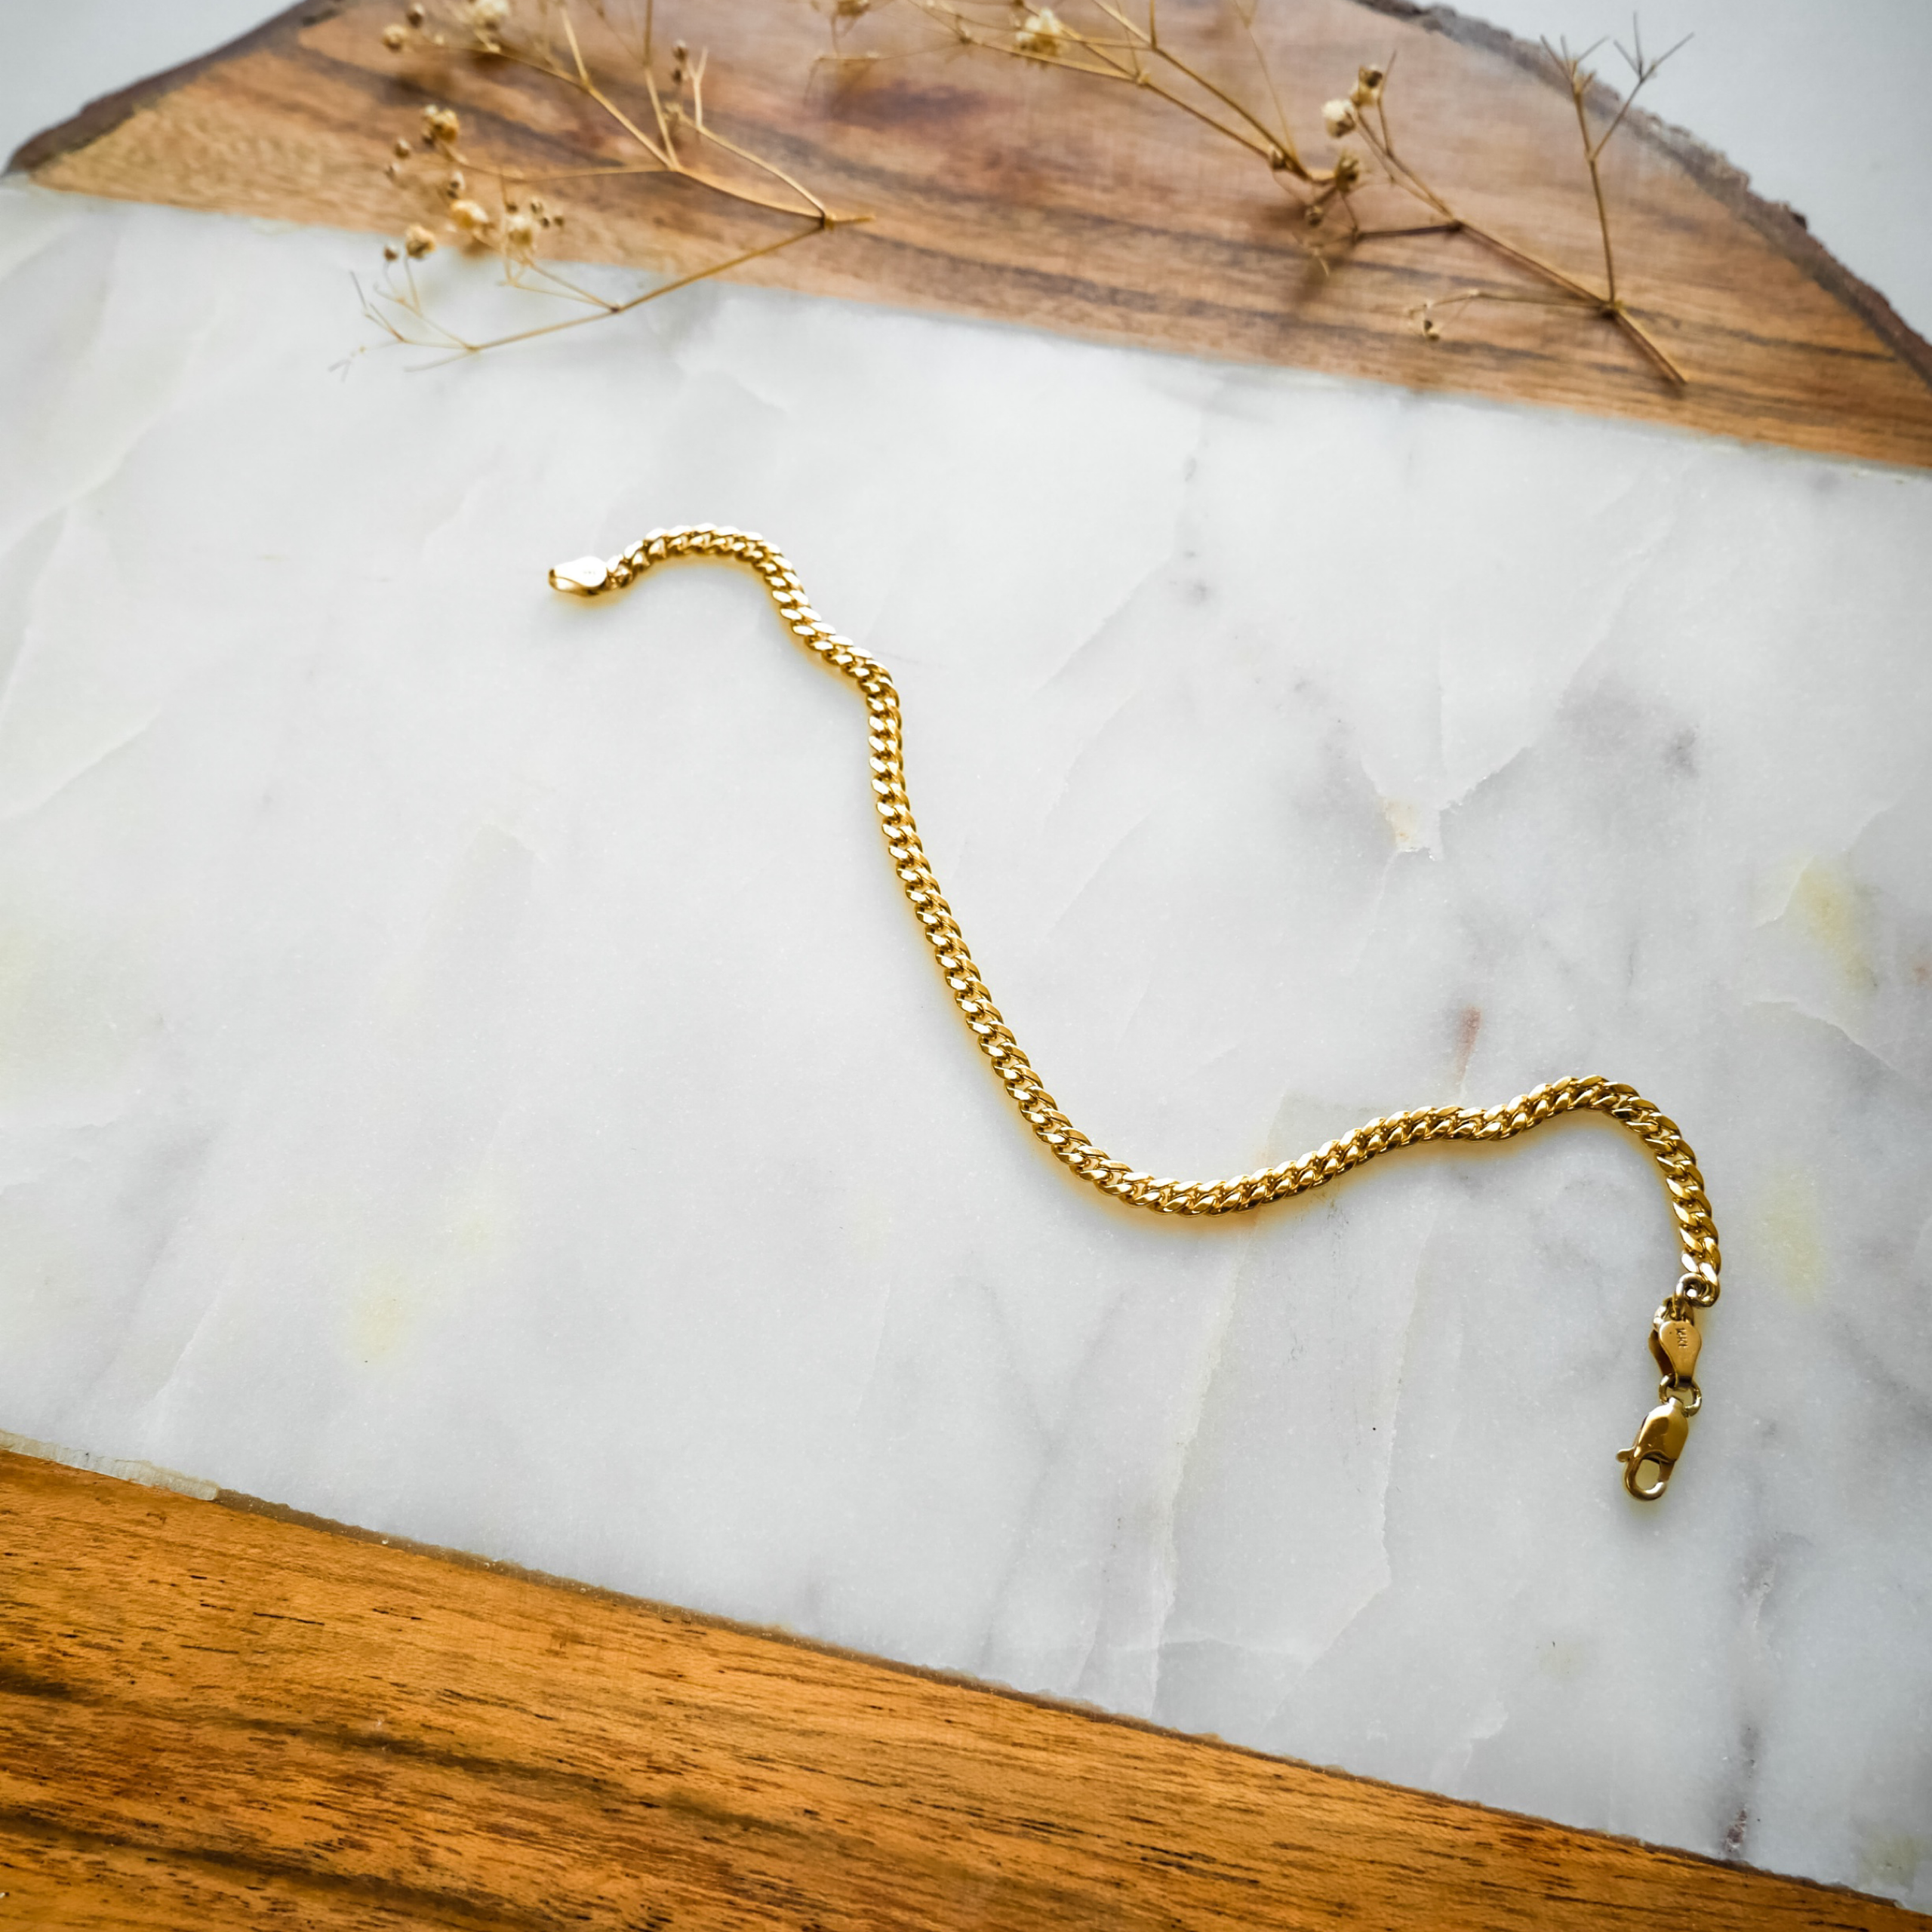 Miami Cuban Link Anklet 3.7mm